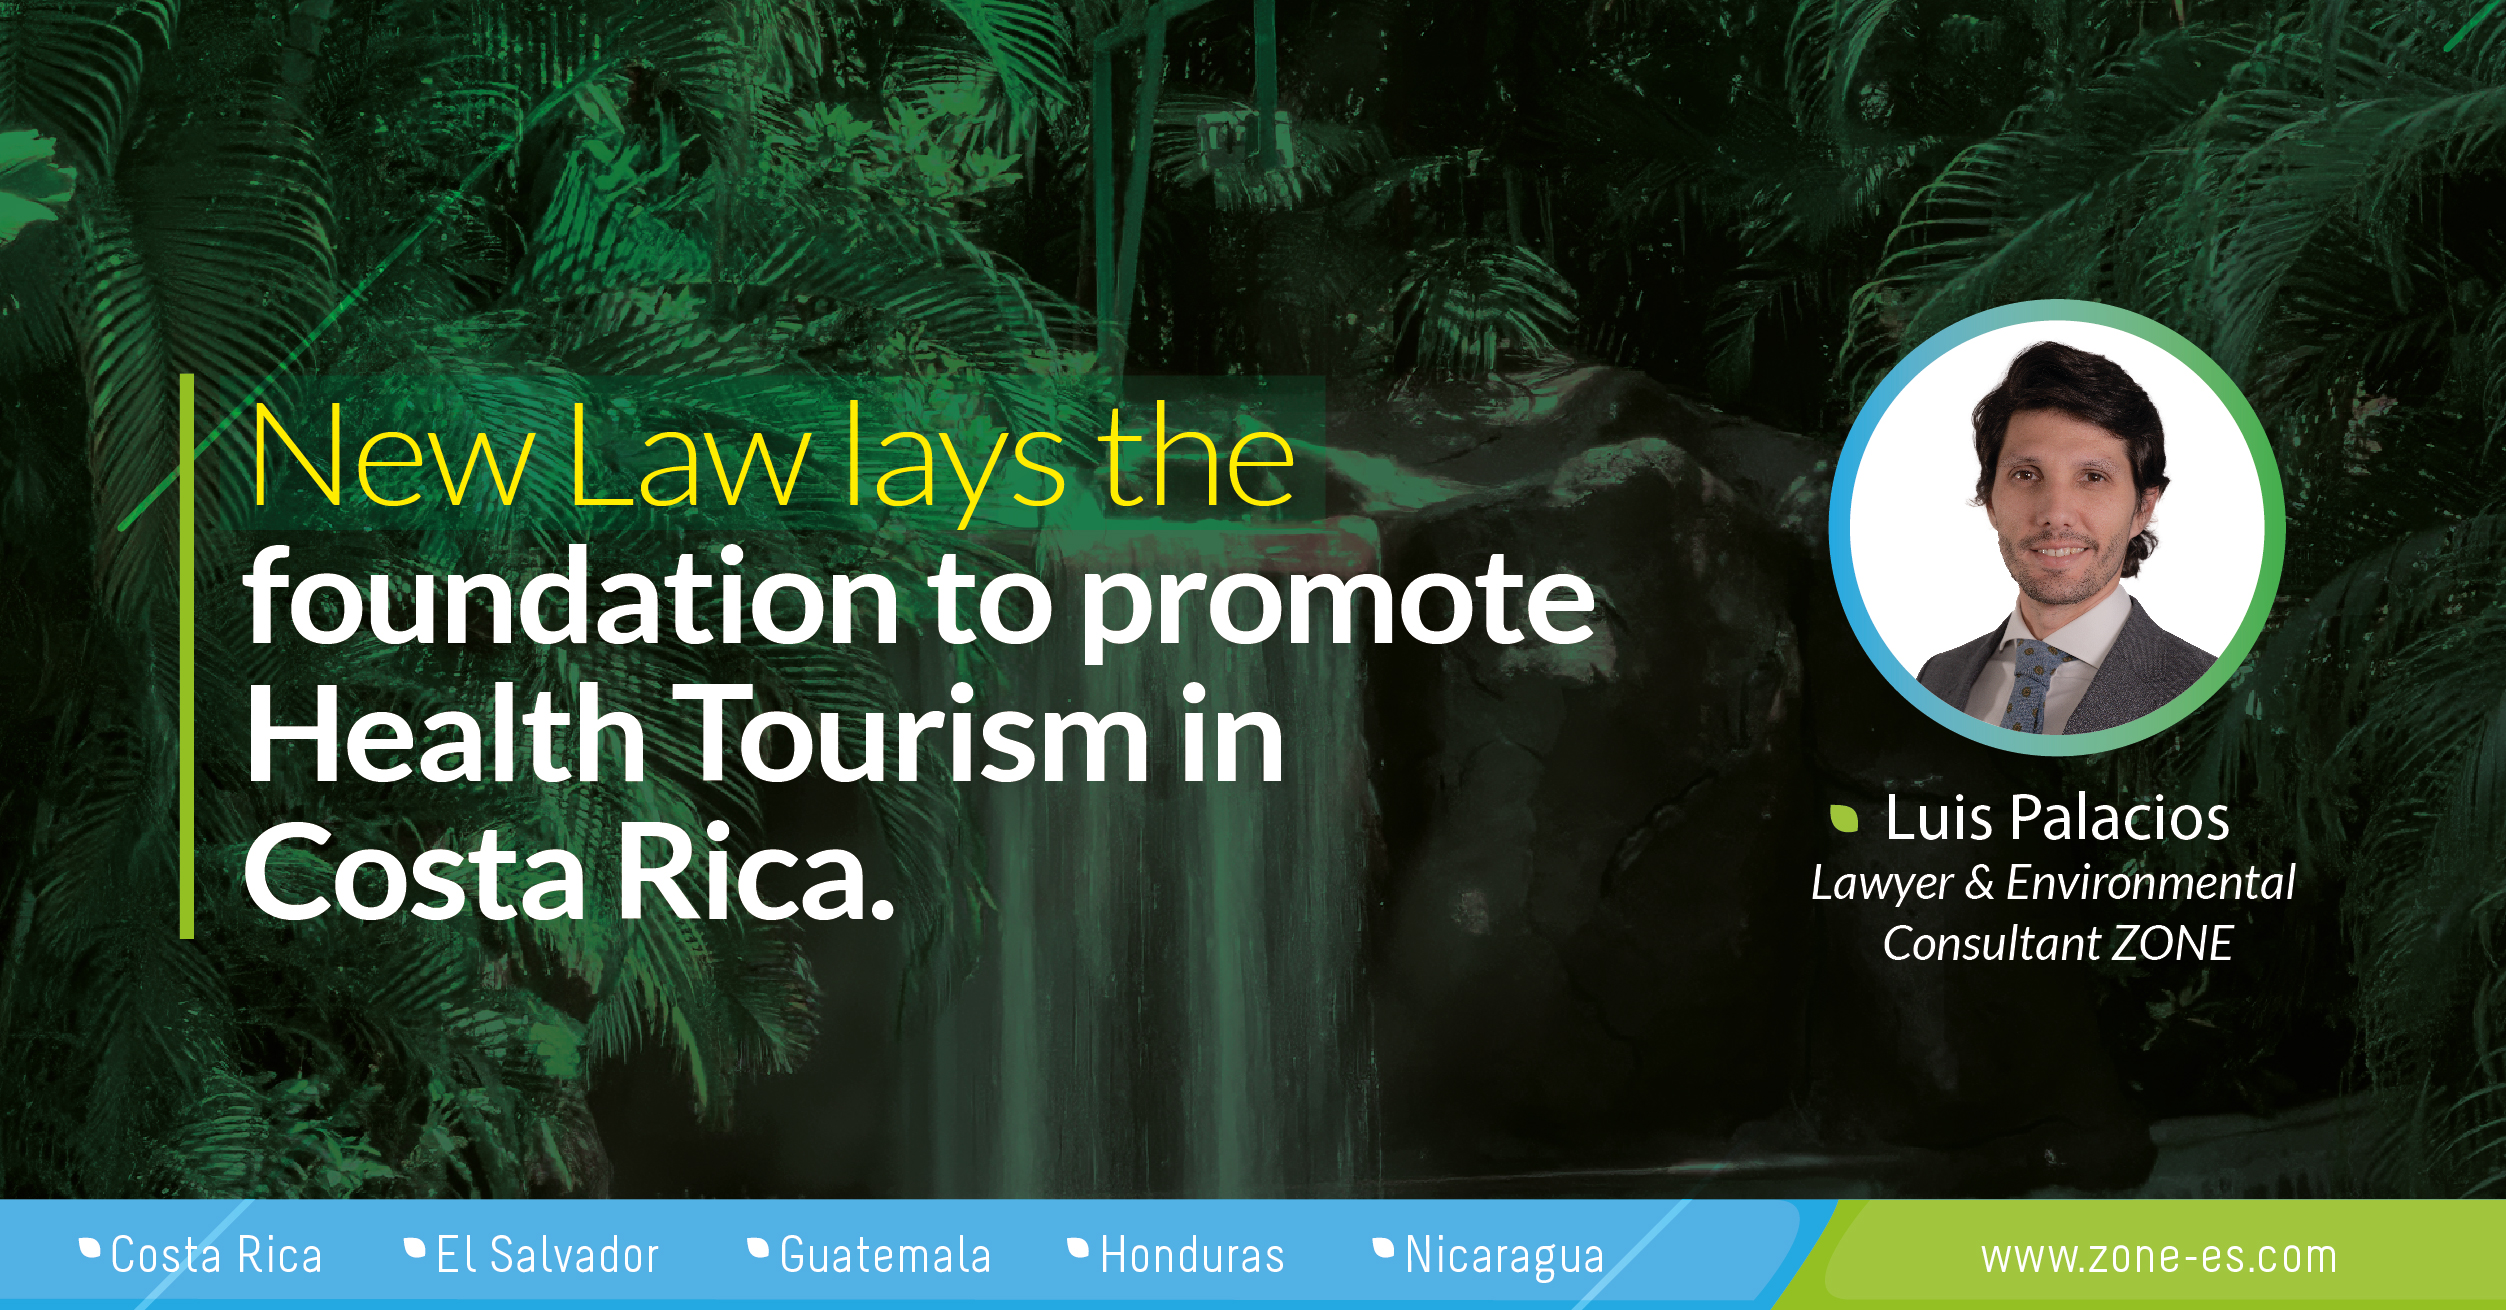 New Law lays the foundation to promote Health Tourism in Costa Rica 